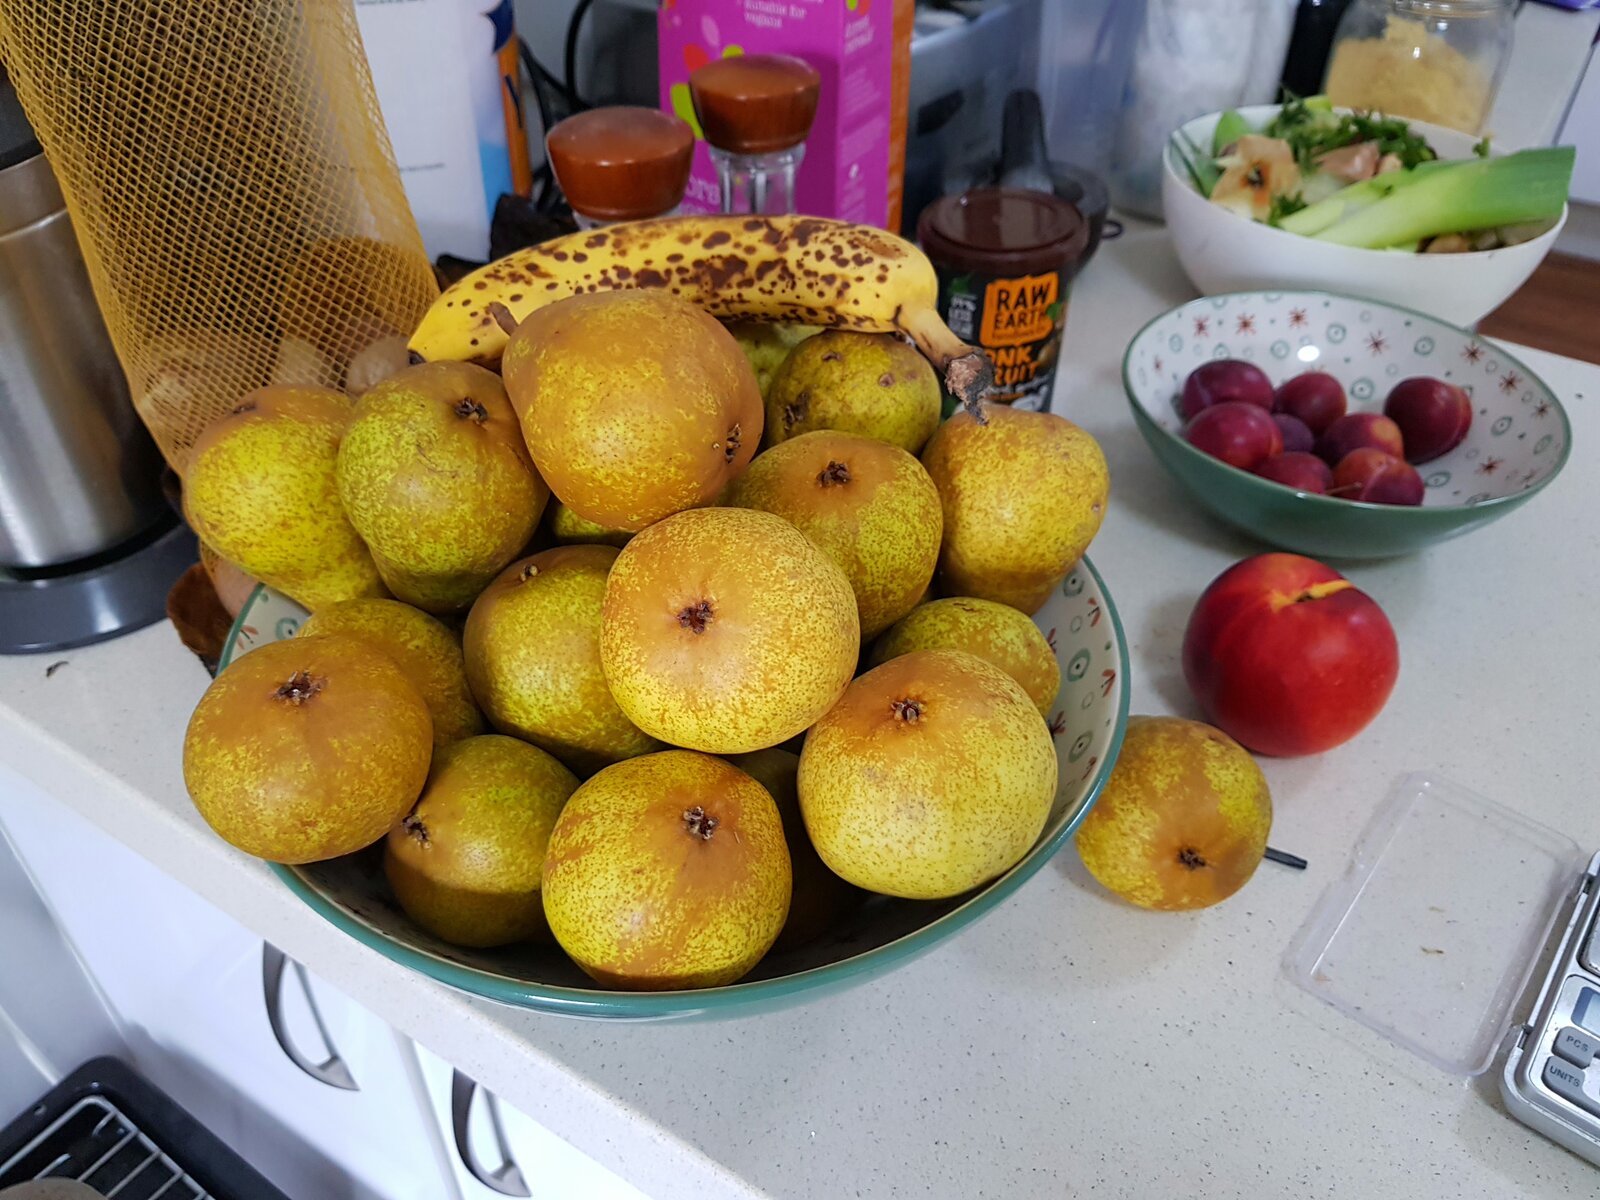 Some of the pear supply